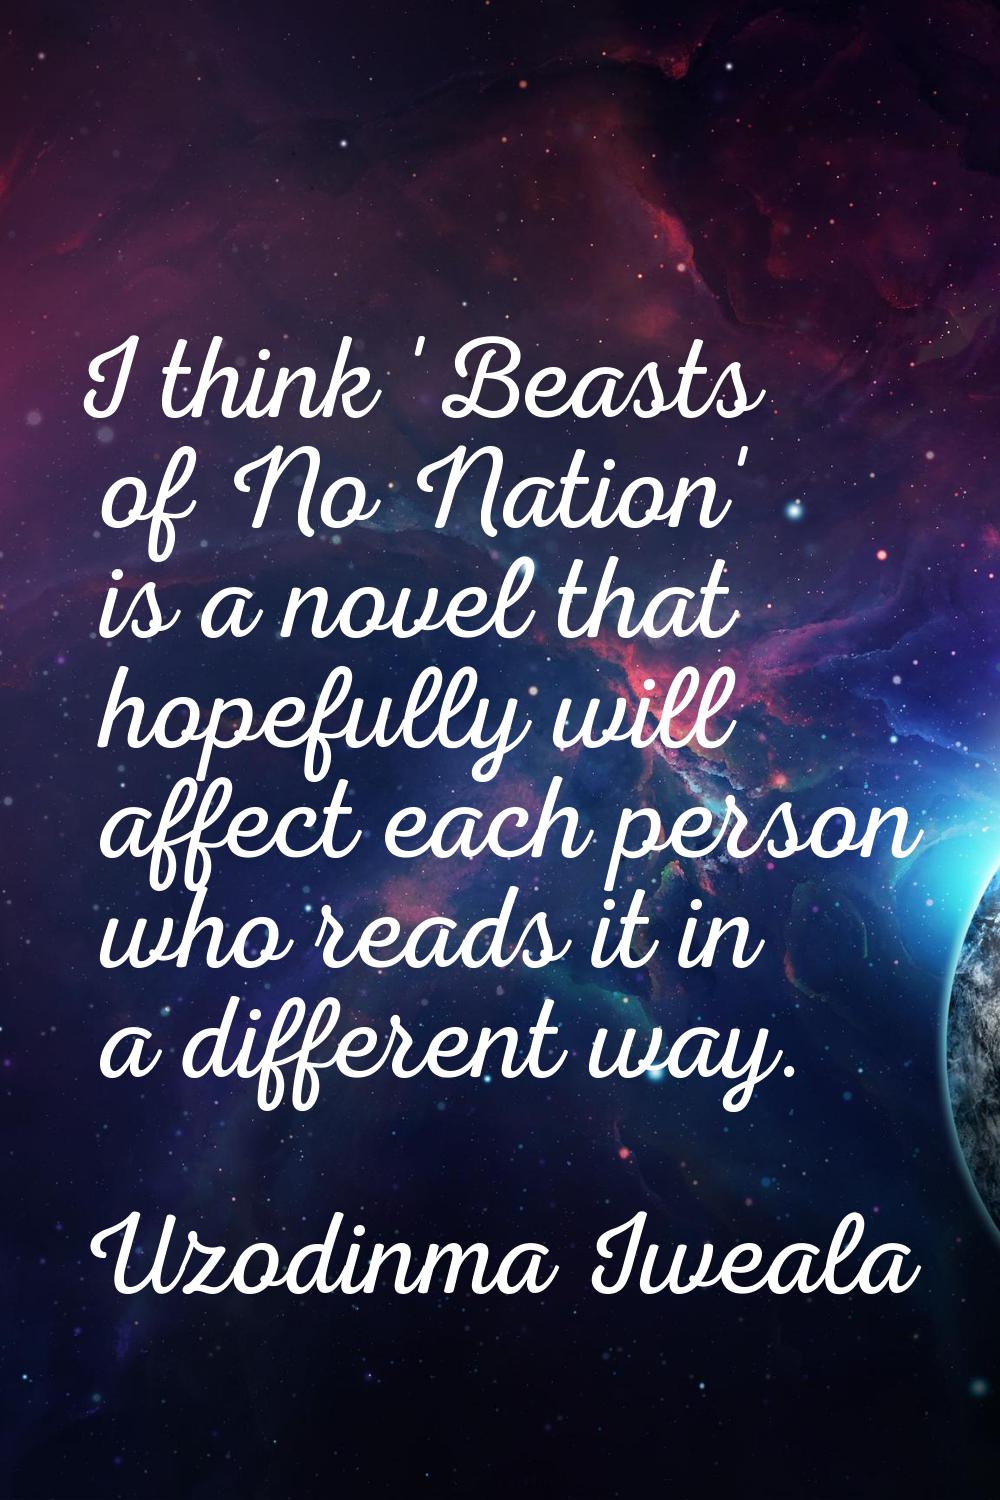 I think 'Beasts of No Nation' is a novel that hopefully will affect each person who reads it in a d